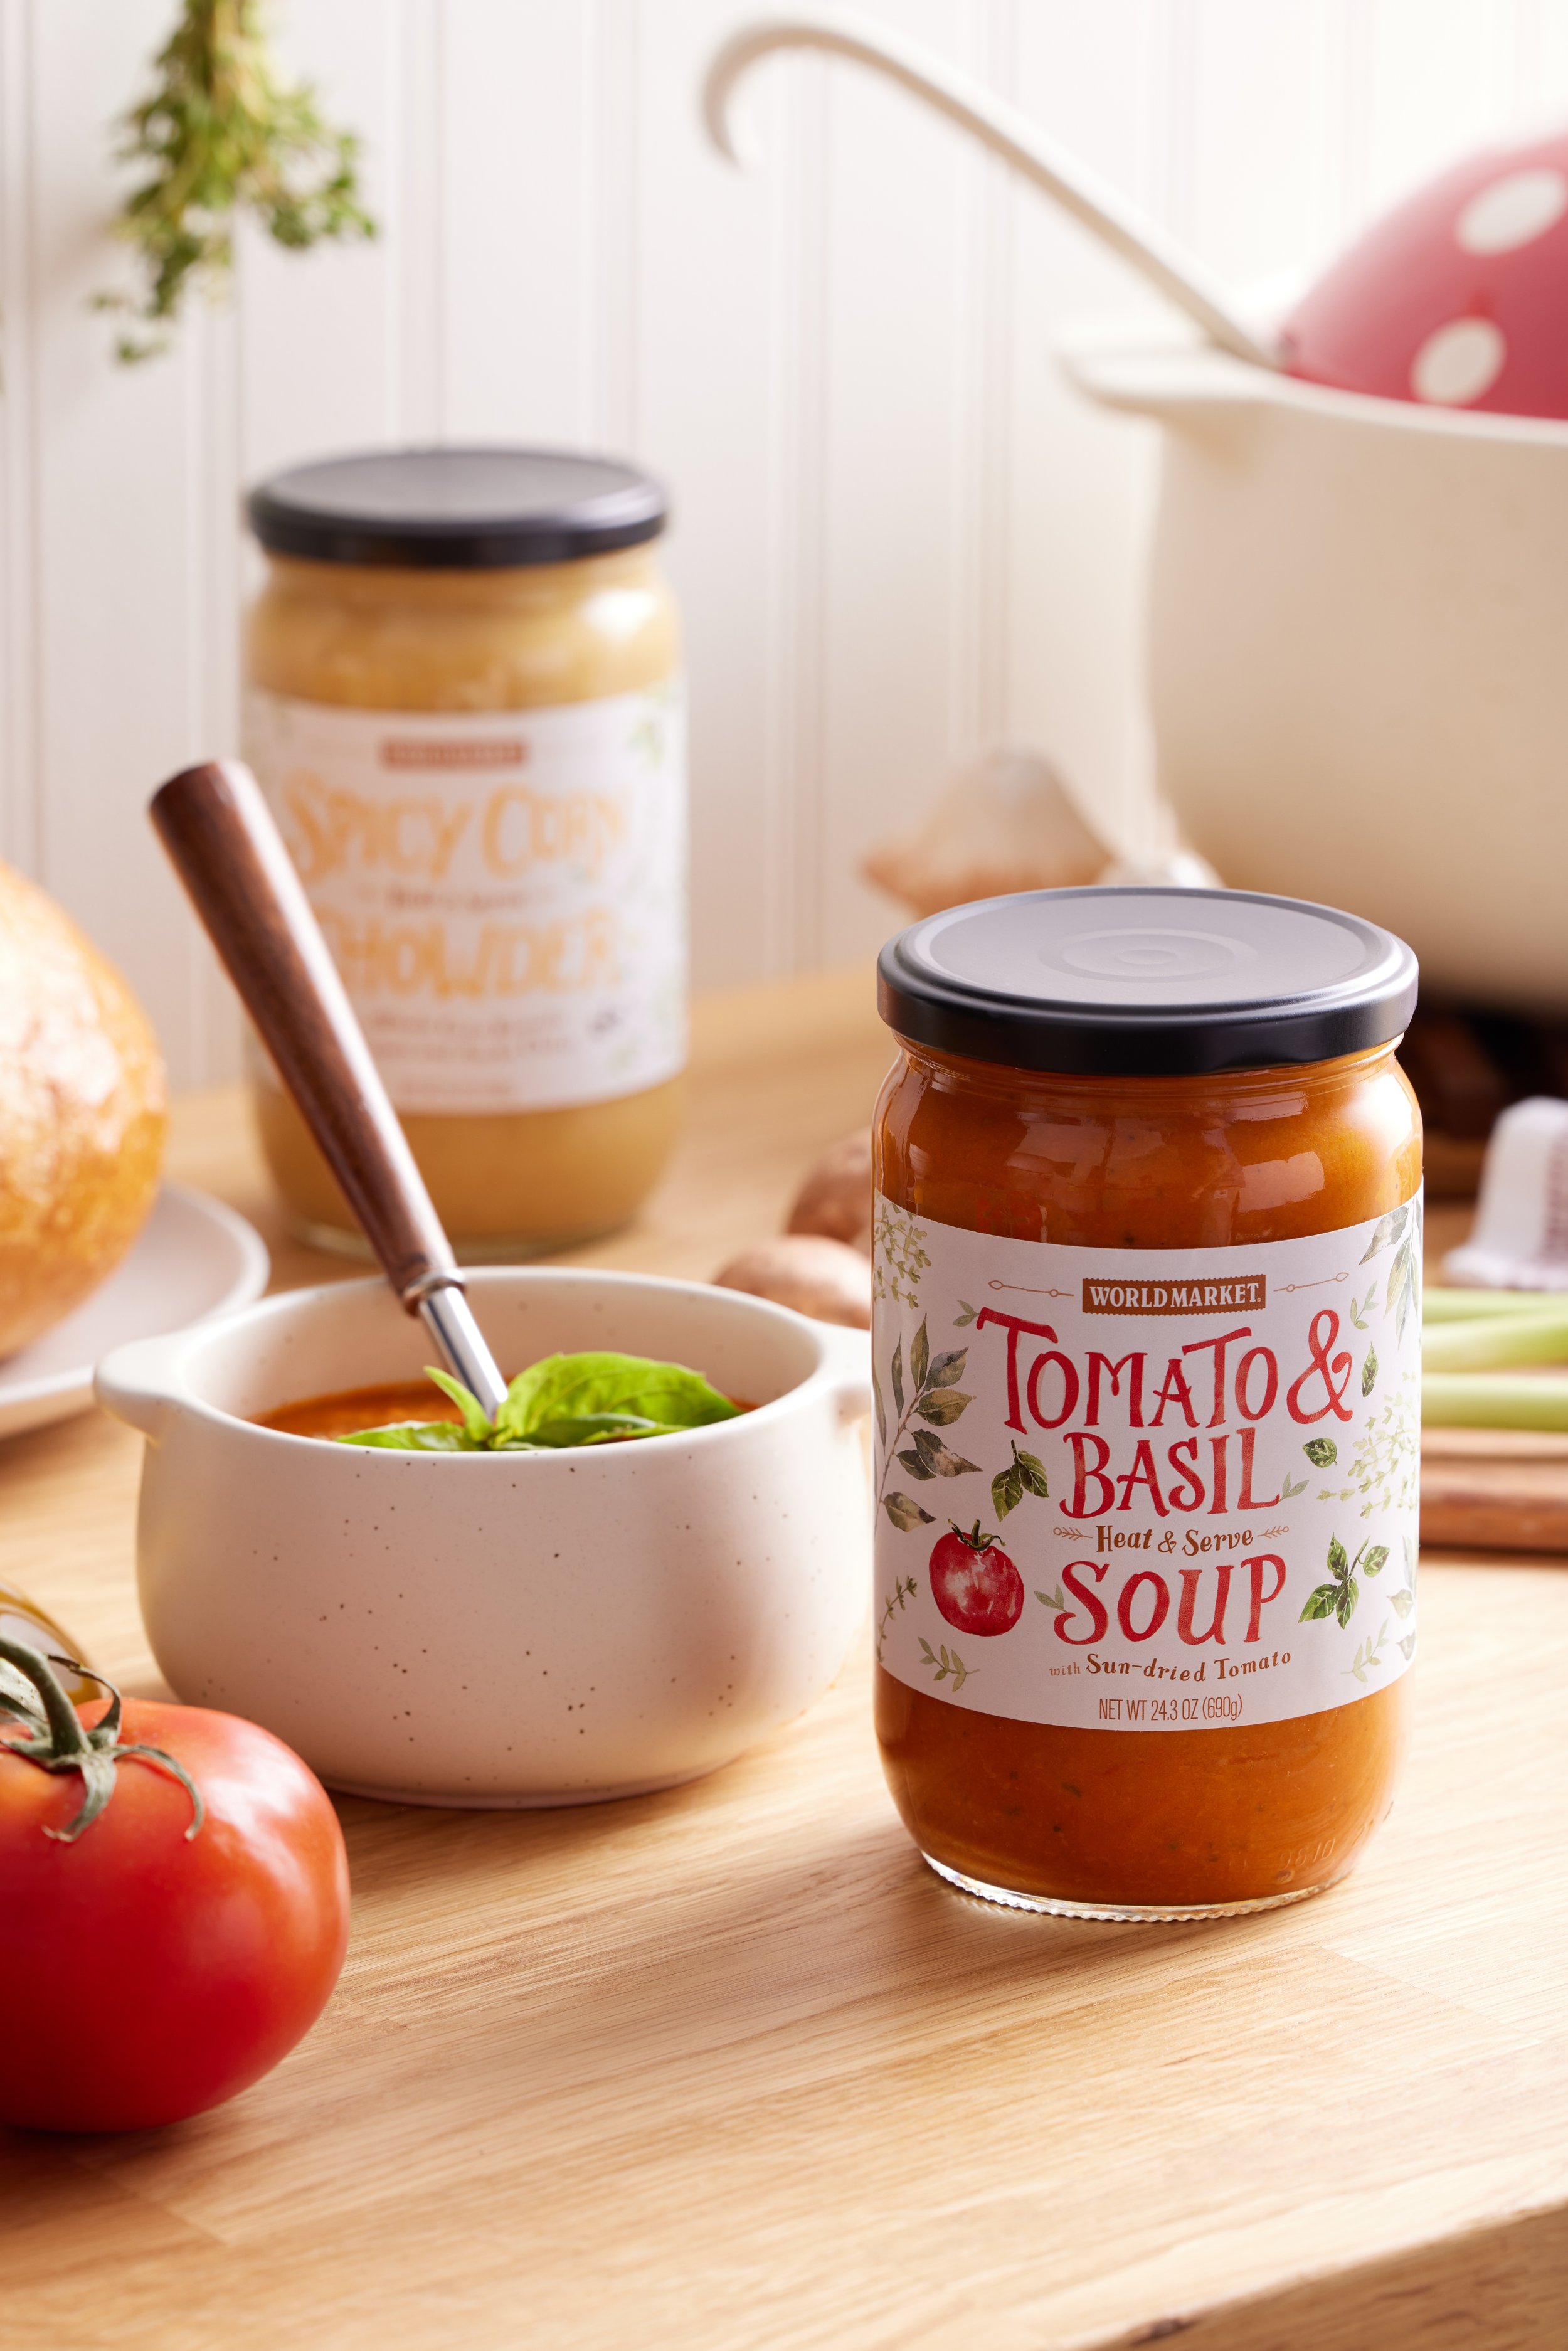 World Market Private Label Harvest Soup - Tomato and Basil